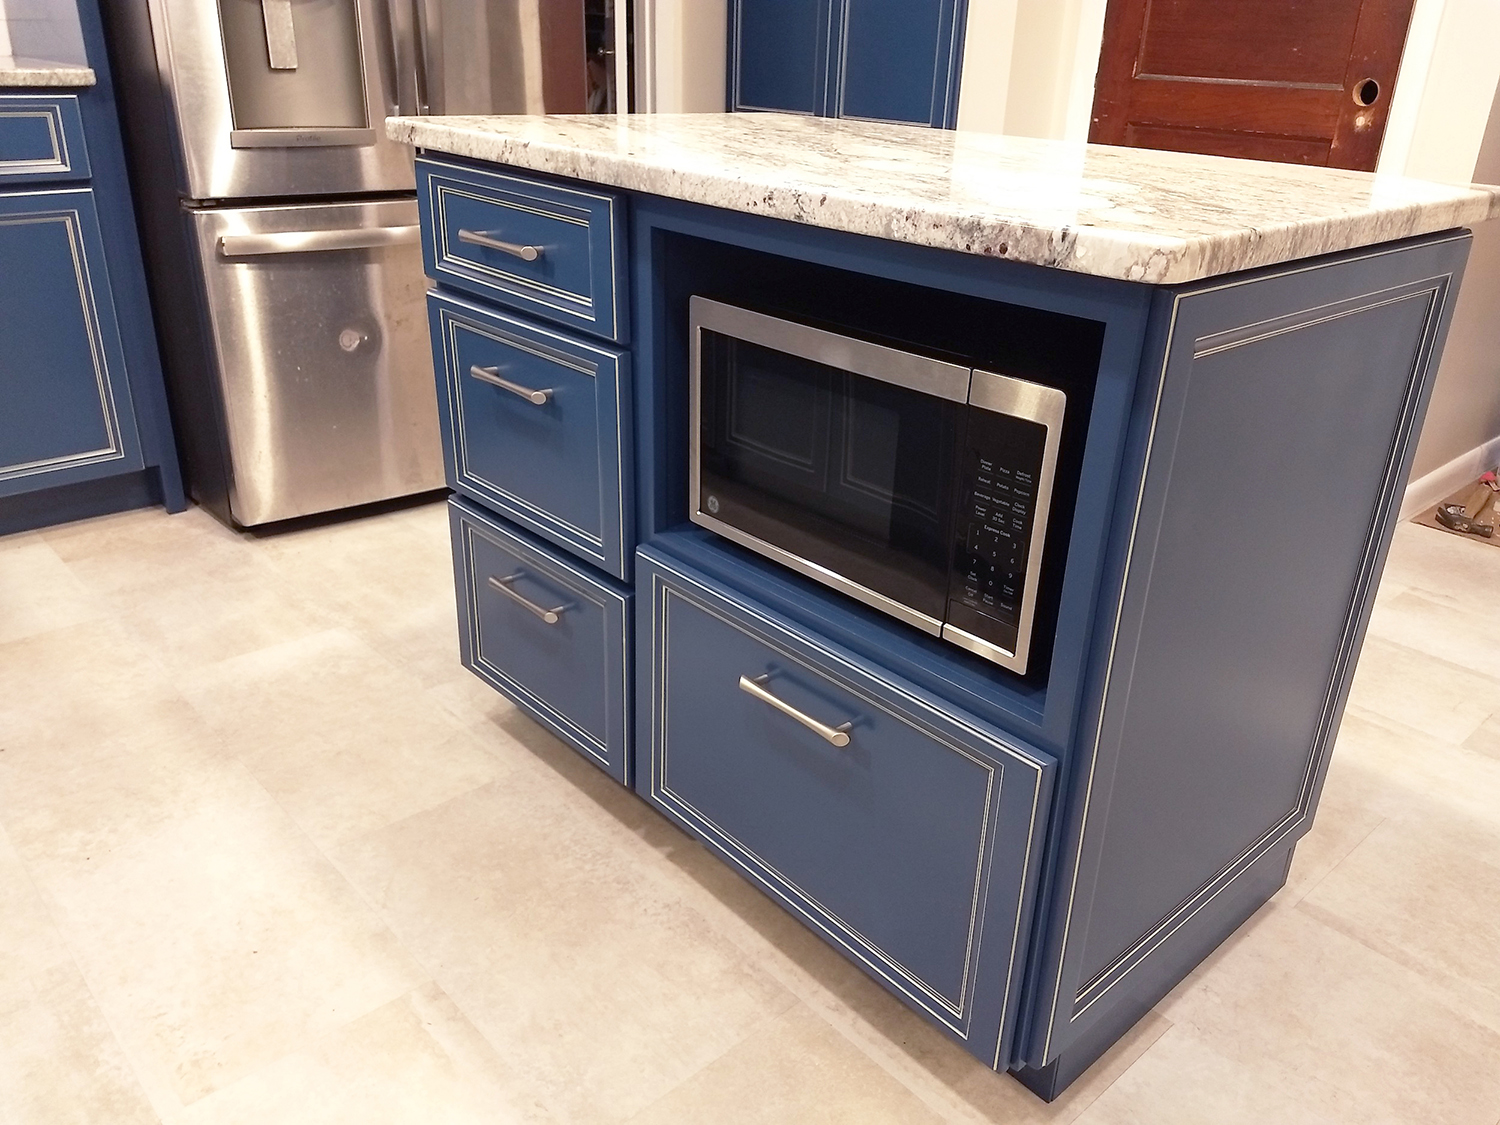 Home remodeling project featuring a kitchen with custom maple cabinetry painted blue, granite countertops, ceramic & marble backsplash, stainless / satin nickel accessories, and a hidden microwave